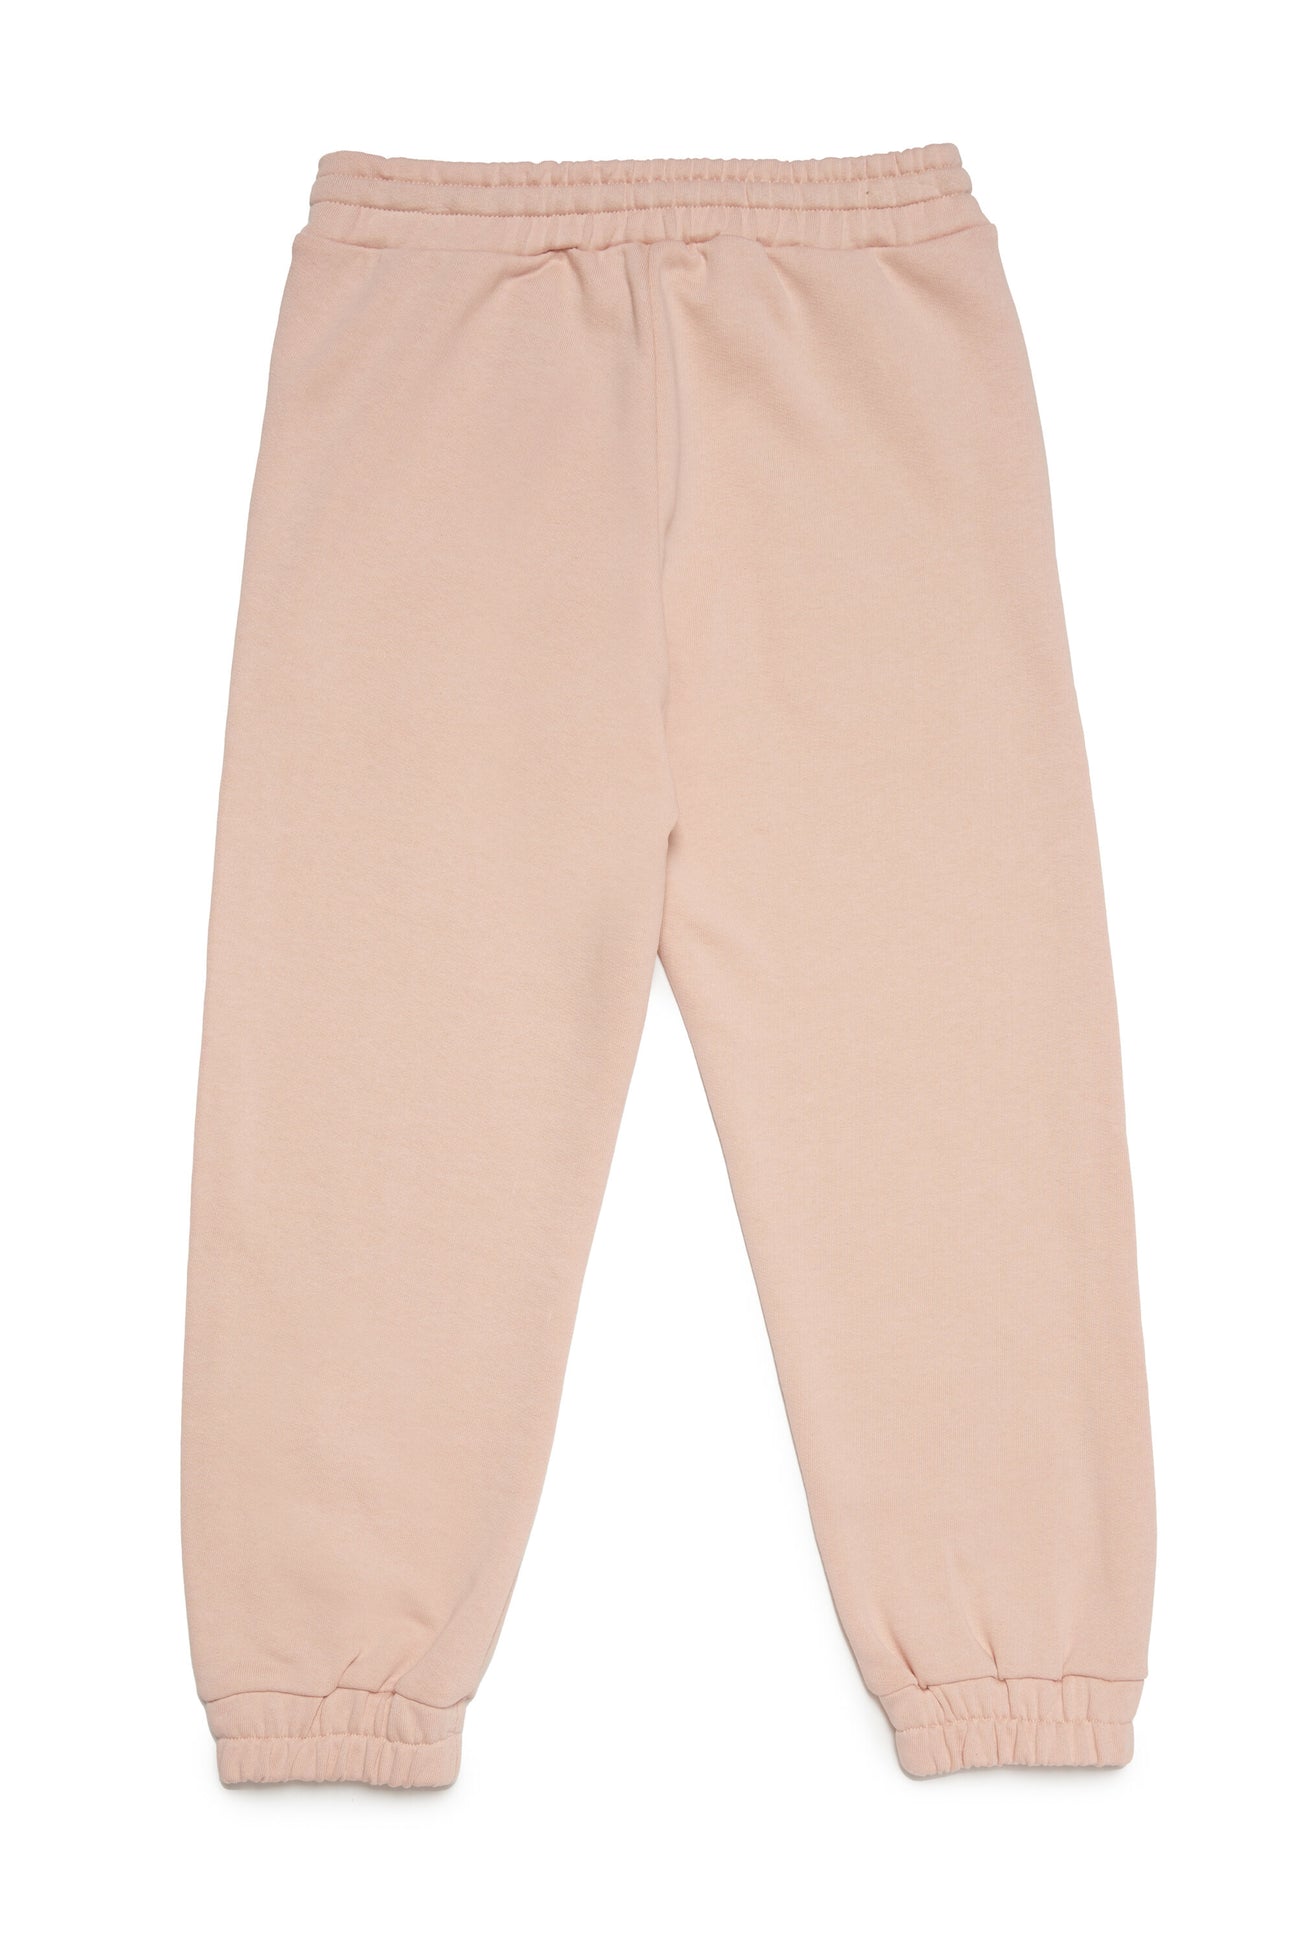 Pink Sweatpants, Soft Pink Jogger, Hand Printed Unisex Jogging Pants, Cozy  Fleece Lounge Pants, Ethical Clothing, Cute Gift for Her -  Canada